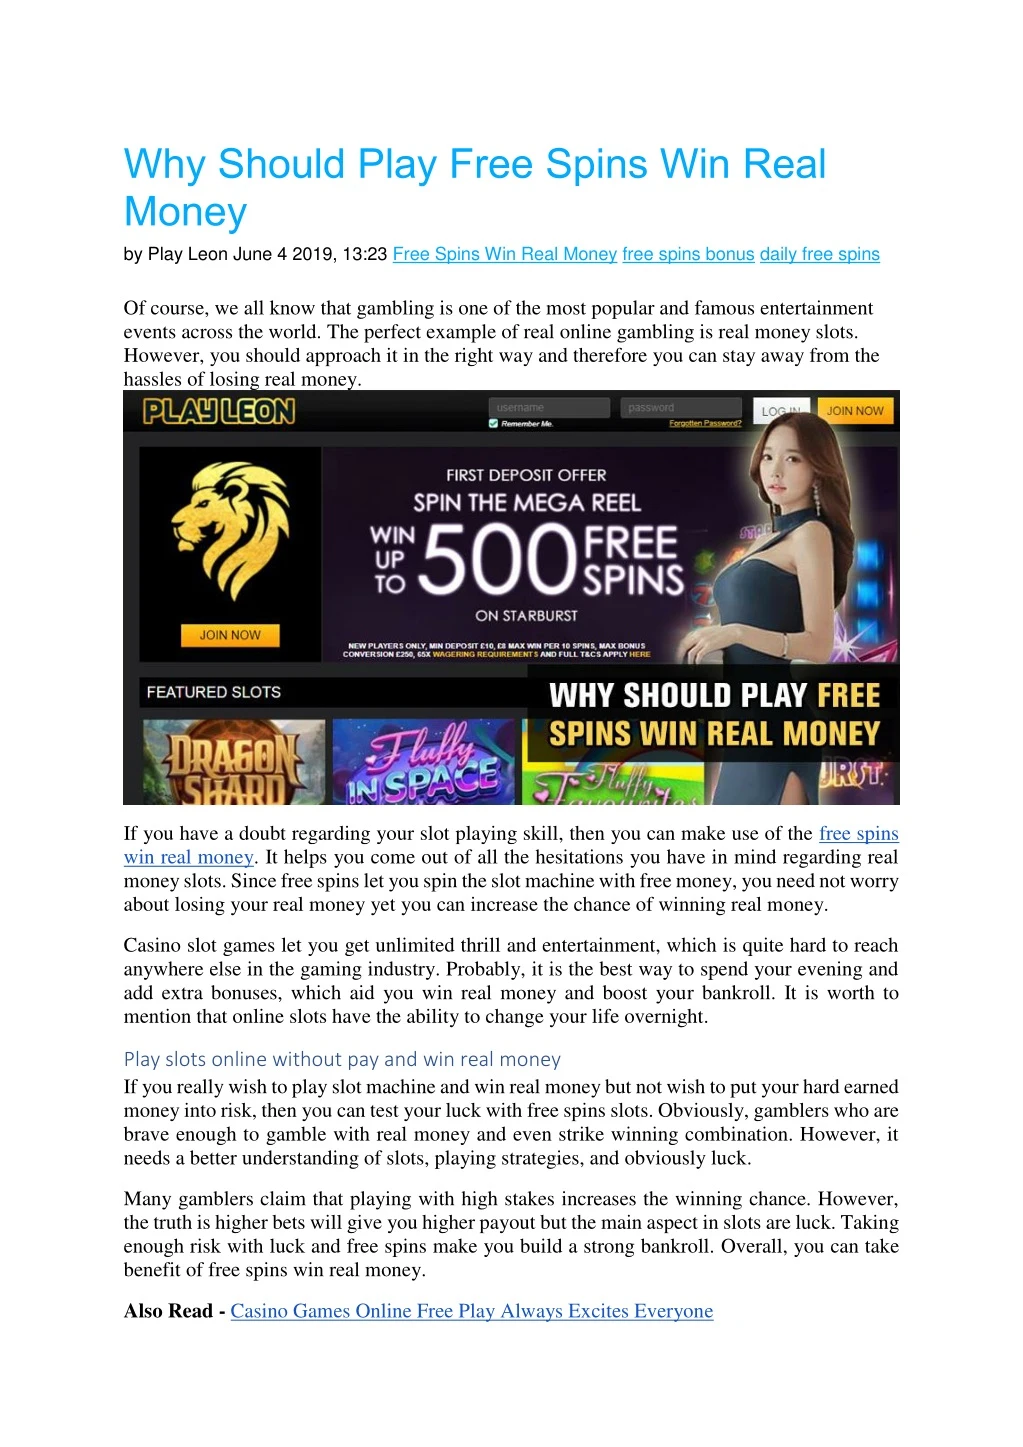 why should play free spins win real money by play